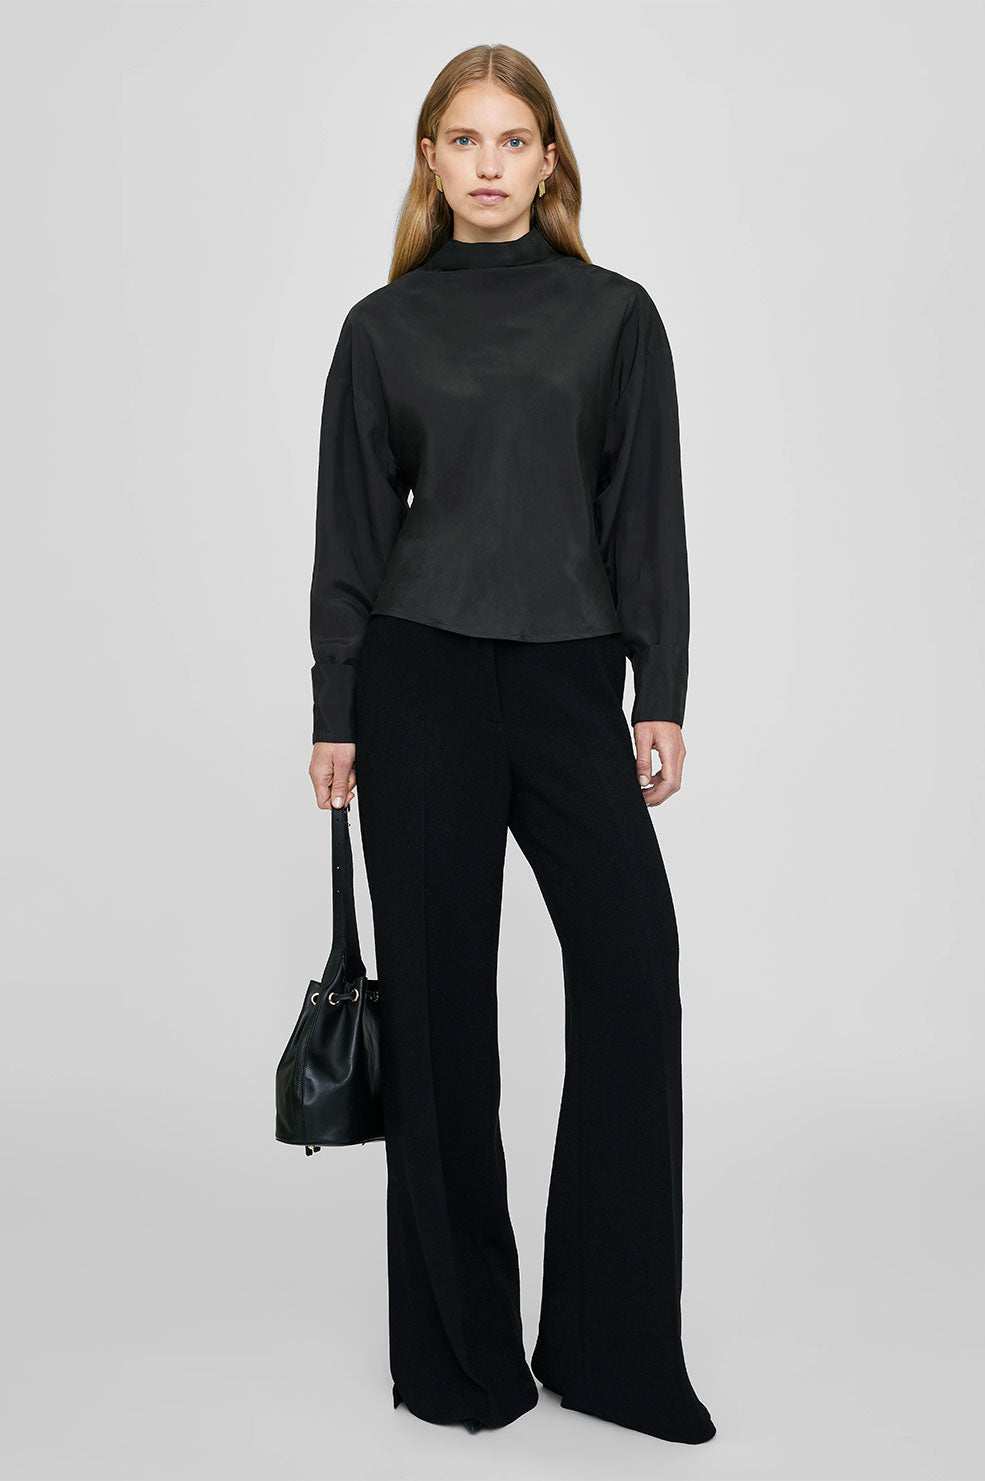 ANINE BING Ivy Top - Black - Front View